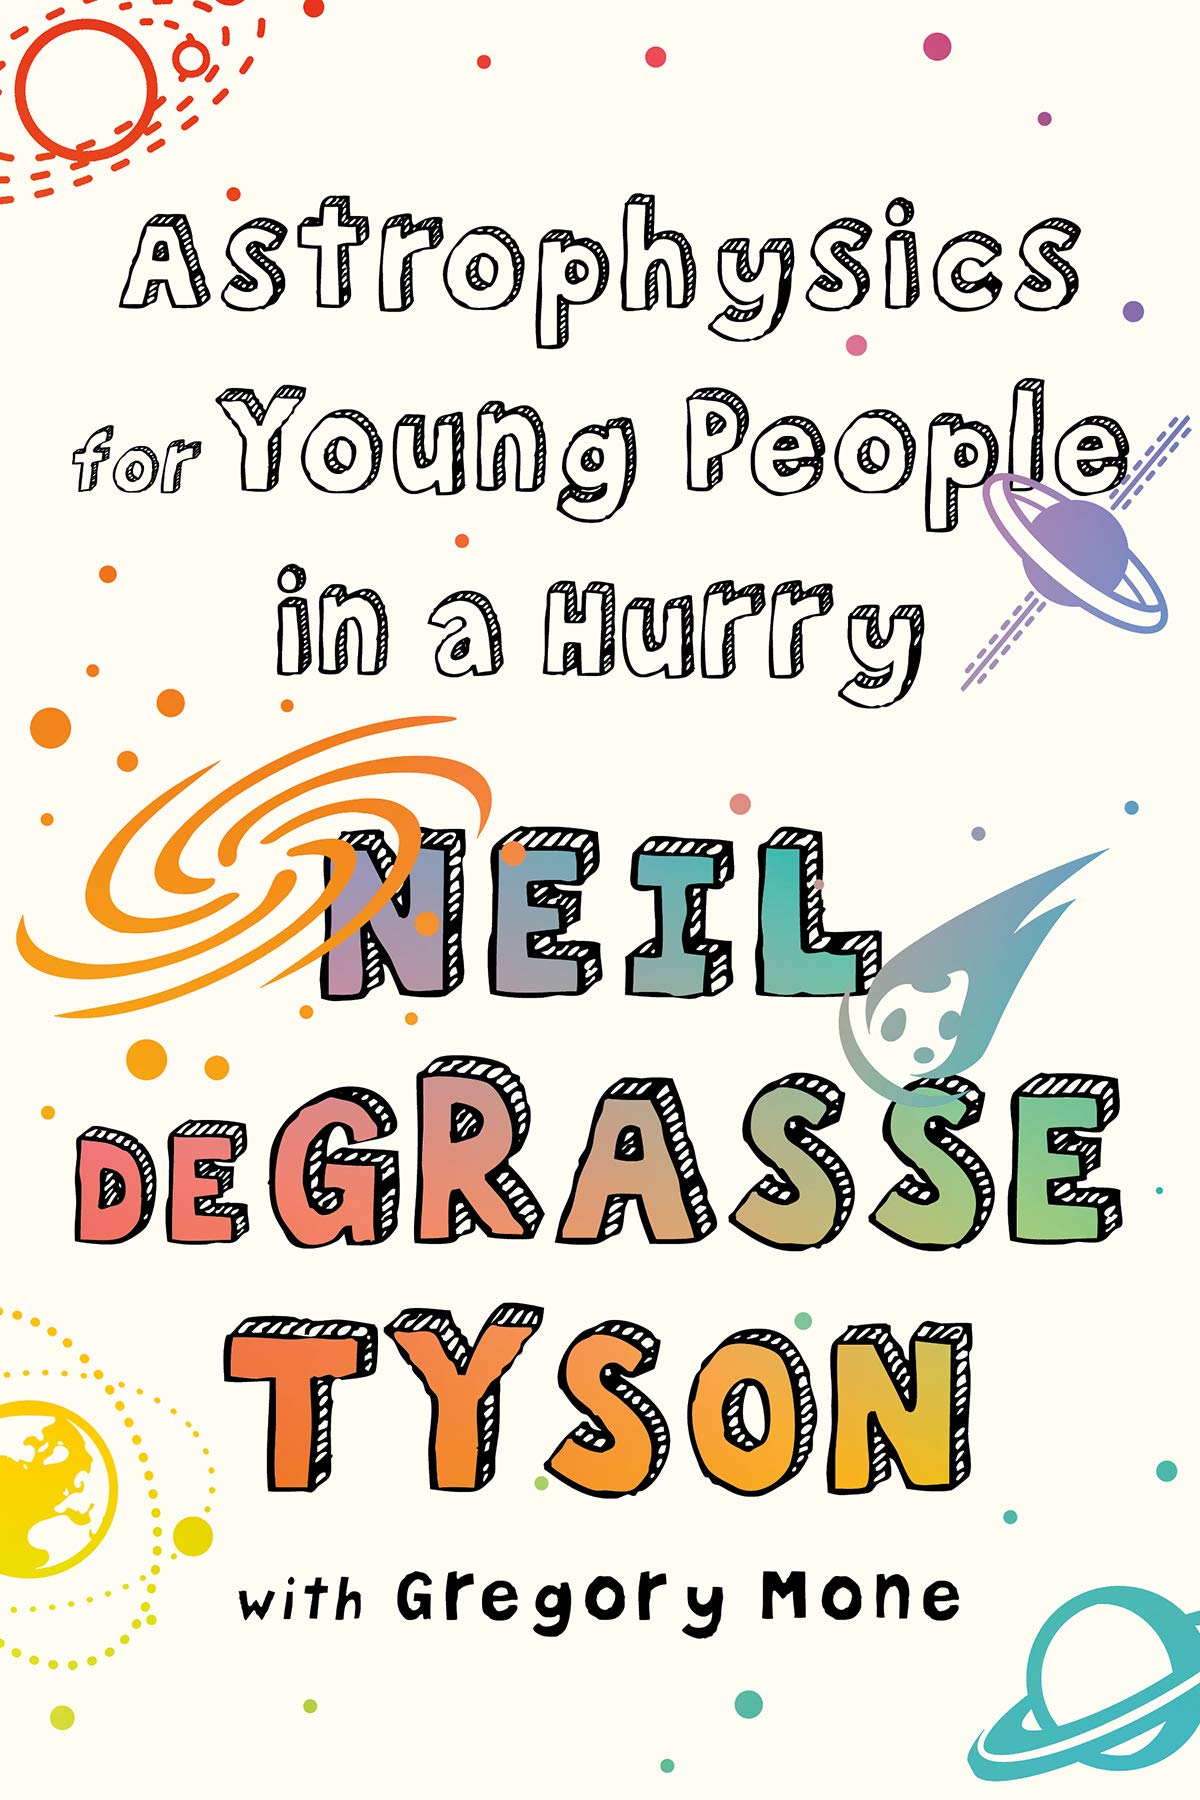 Astrophysics for Young People in a Hurry (eBook) by Neil deGrasse Tyson $1.99